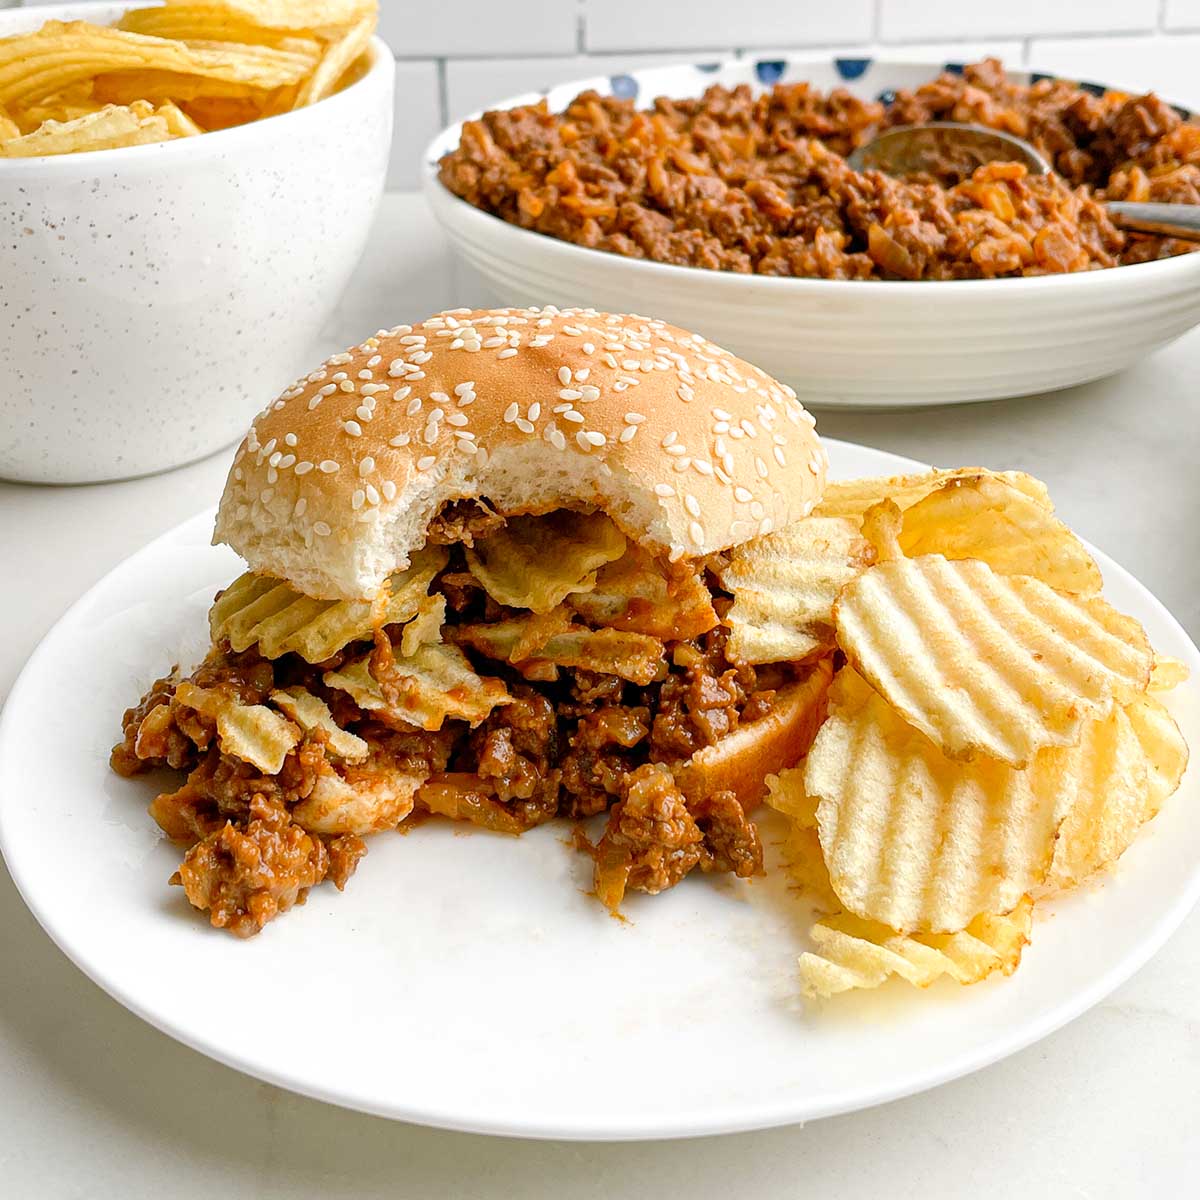 chicken gumbo sloppy joe on a white plate with potato chips.